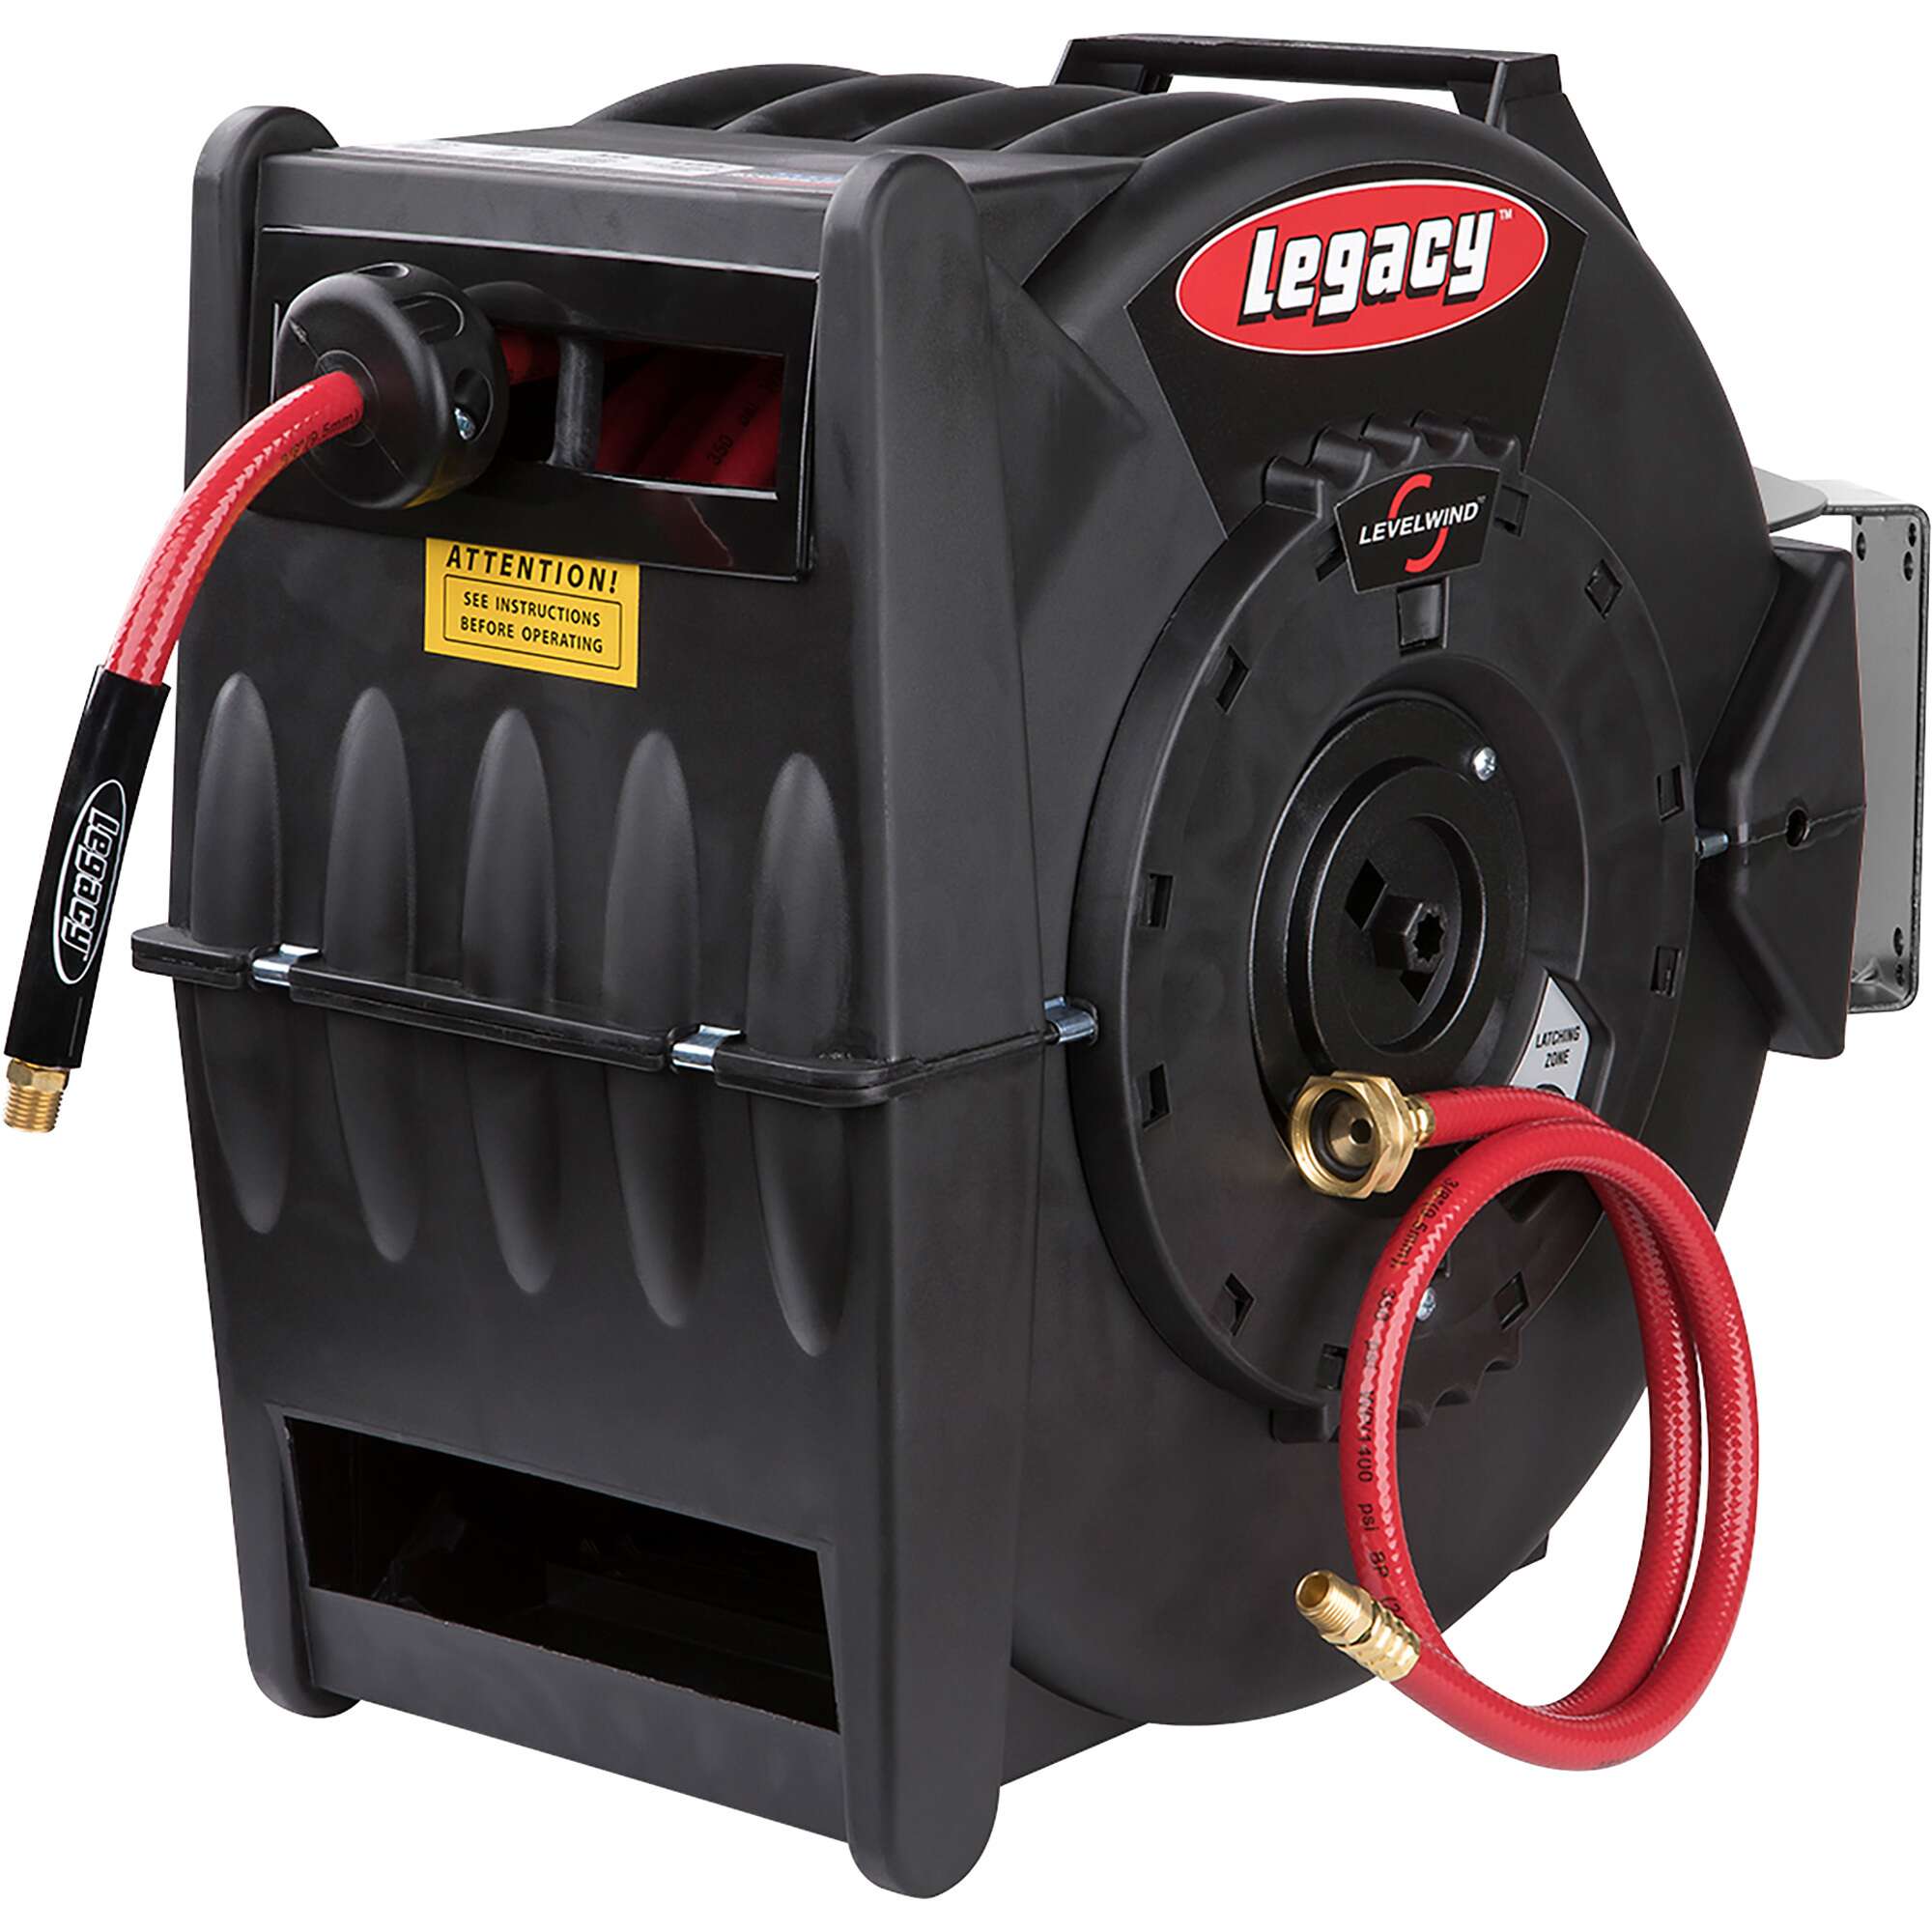 Legacy Retractable Air Hose Reel With 3/8in x 75ft PVC Hose Max